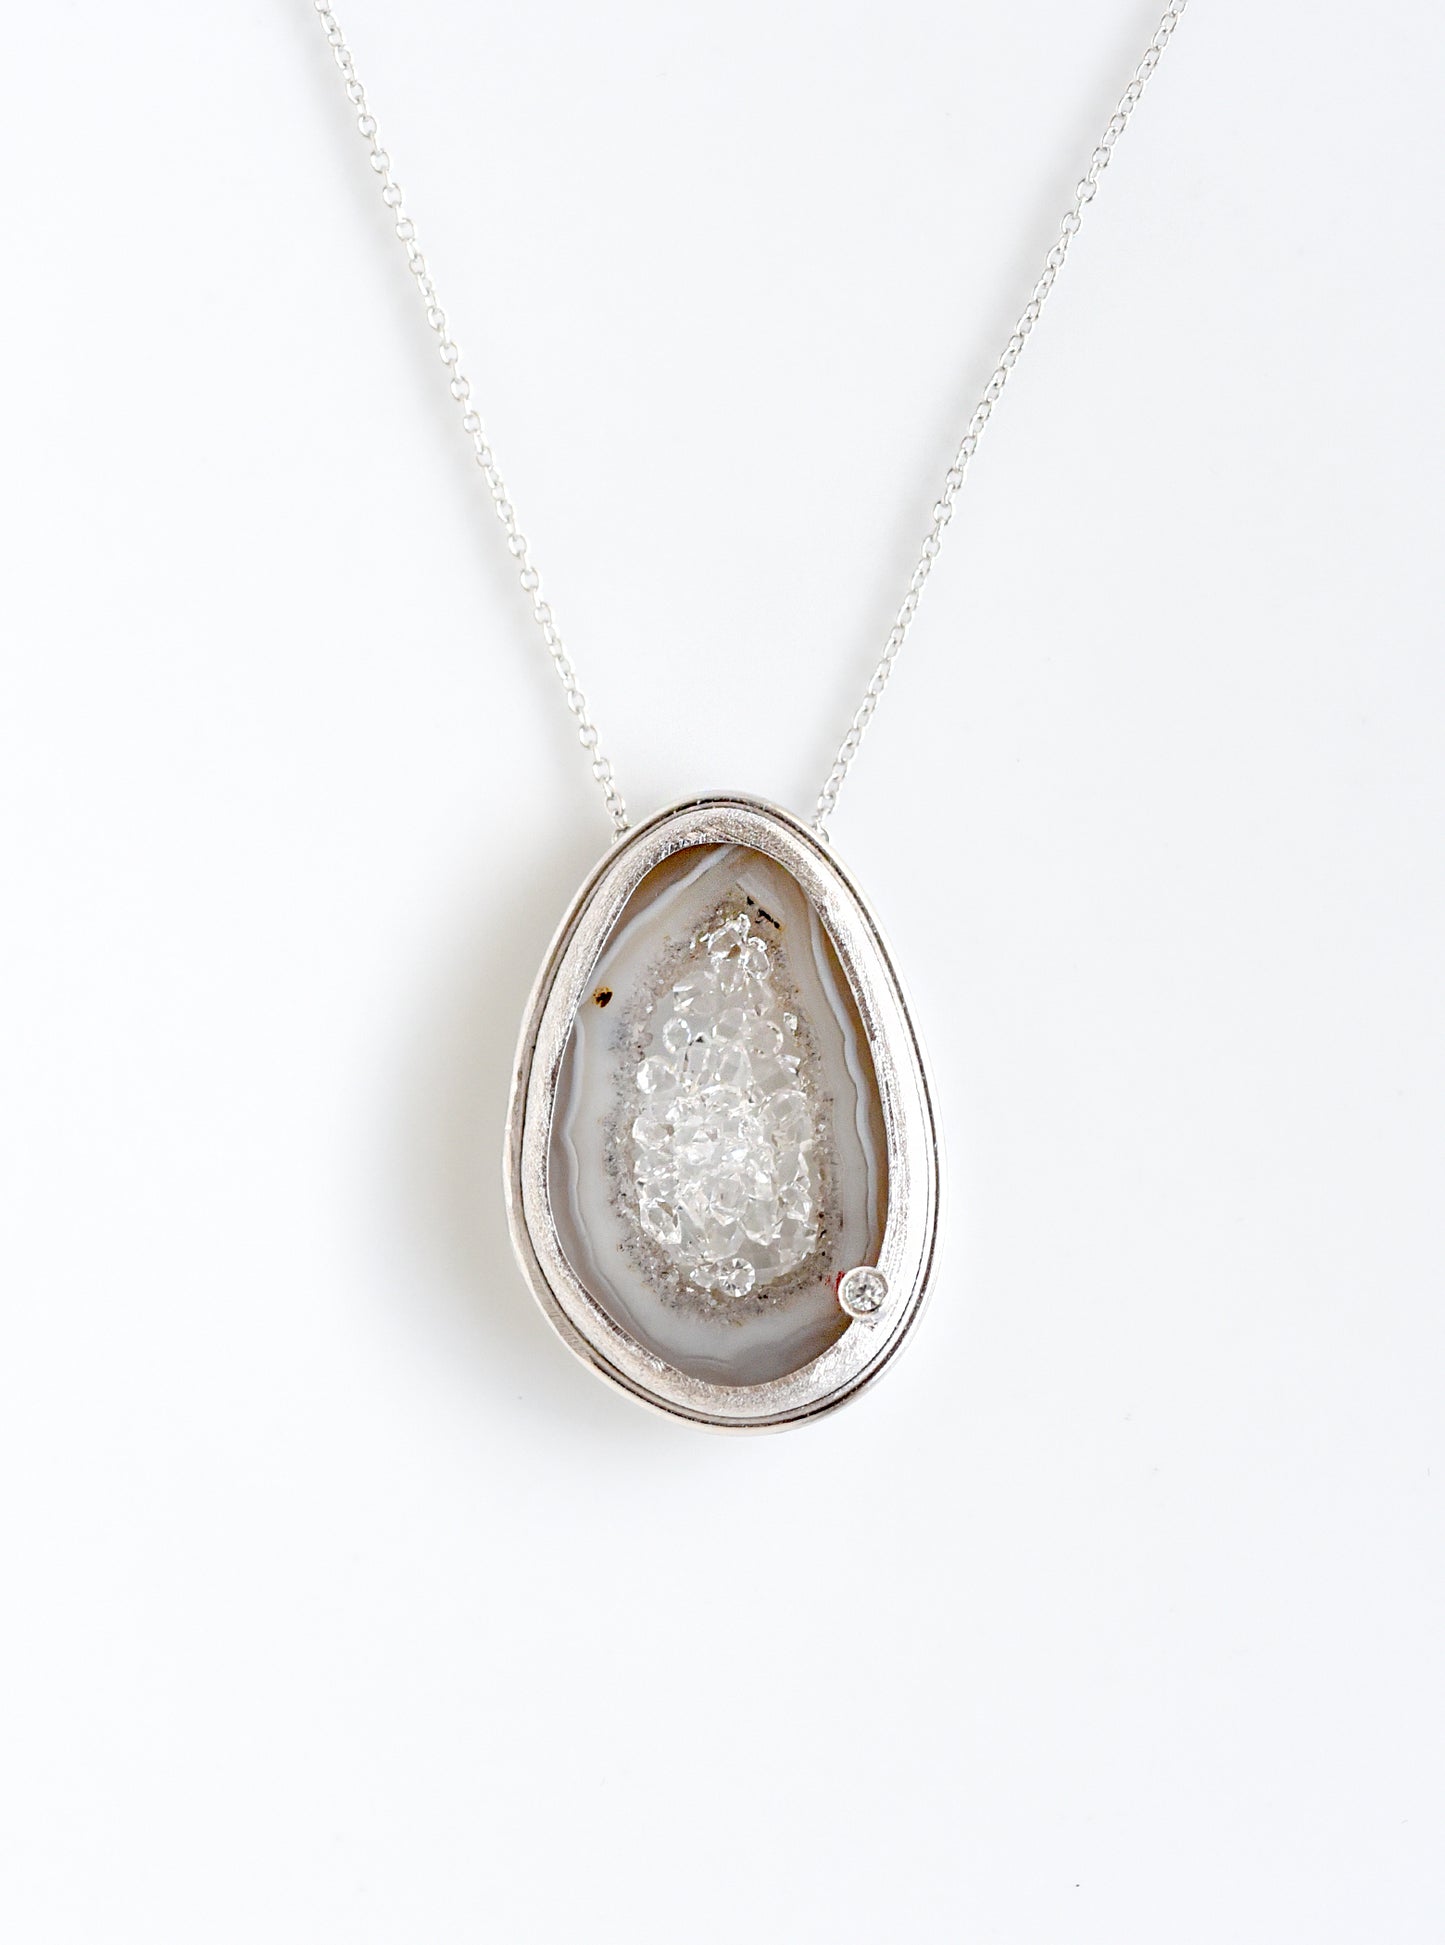 Agate Geode Necklace With Floating Herkimer Diamond